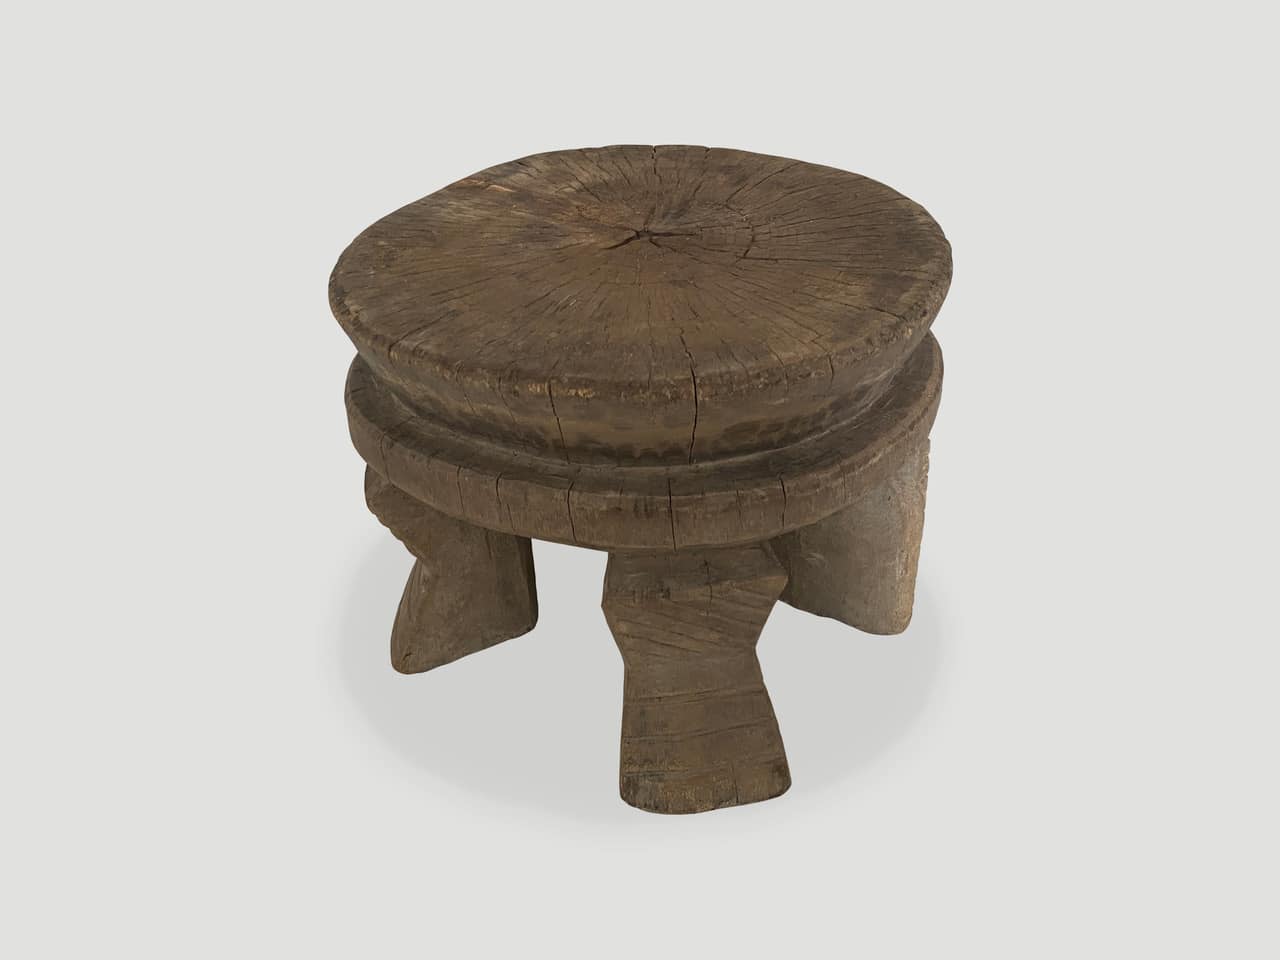 ANTIQUE HAND CARVED AFRICAN SIDE TABLE OR STOOL.